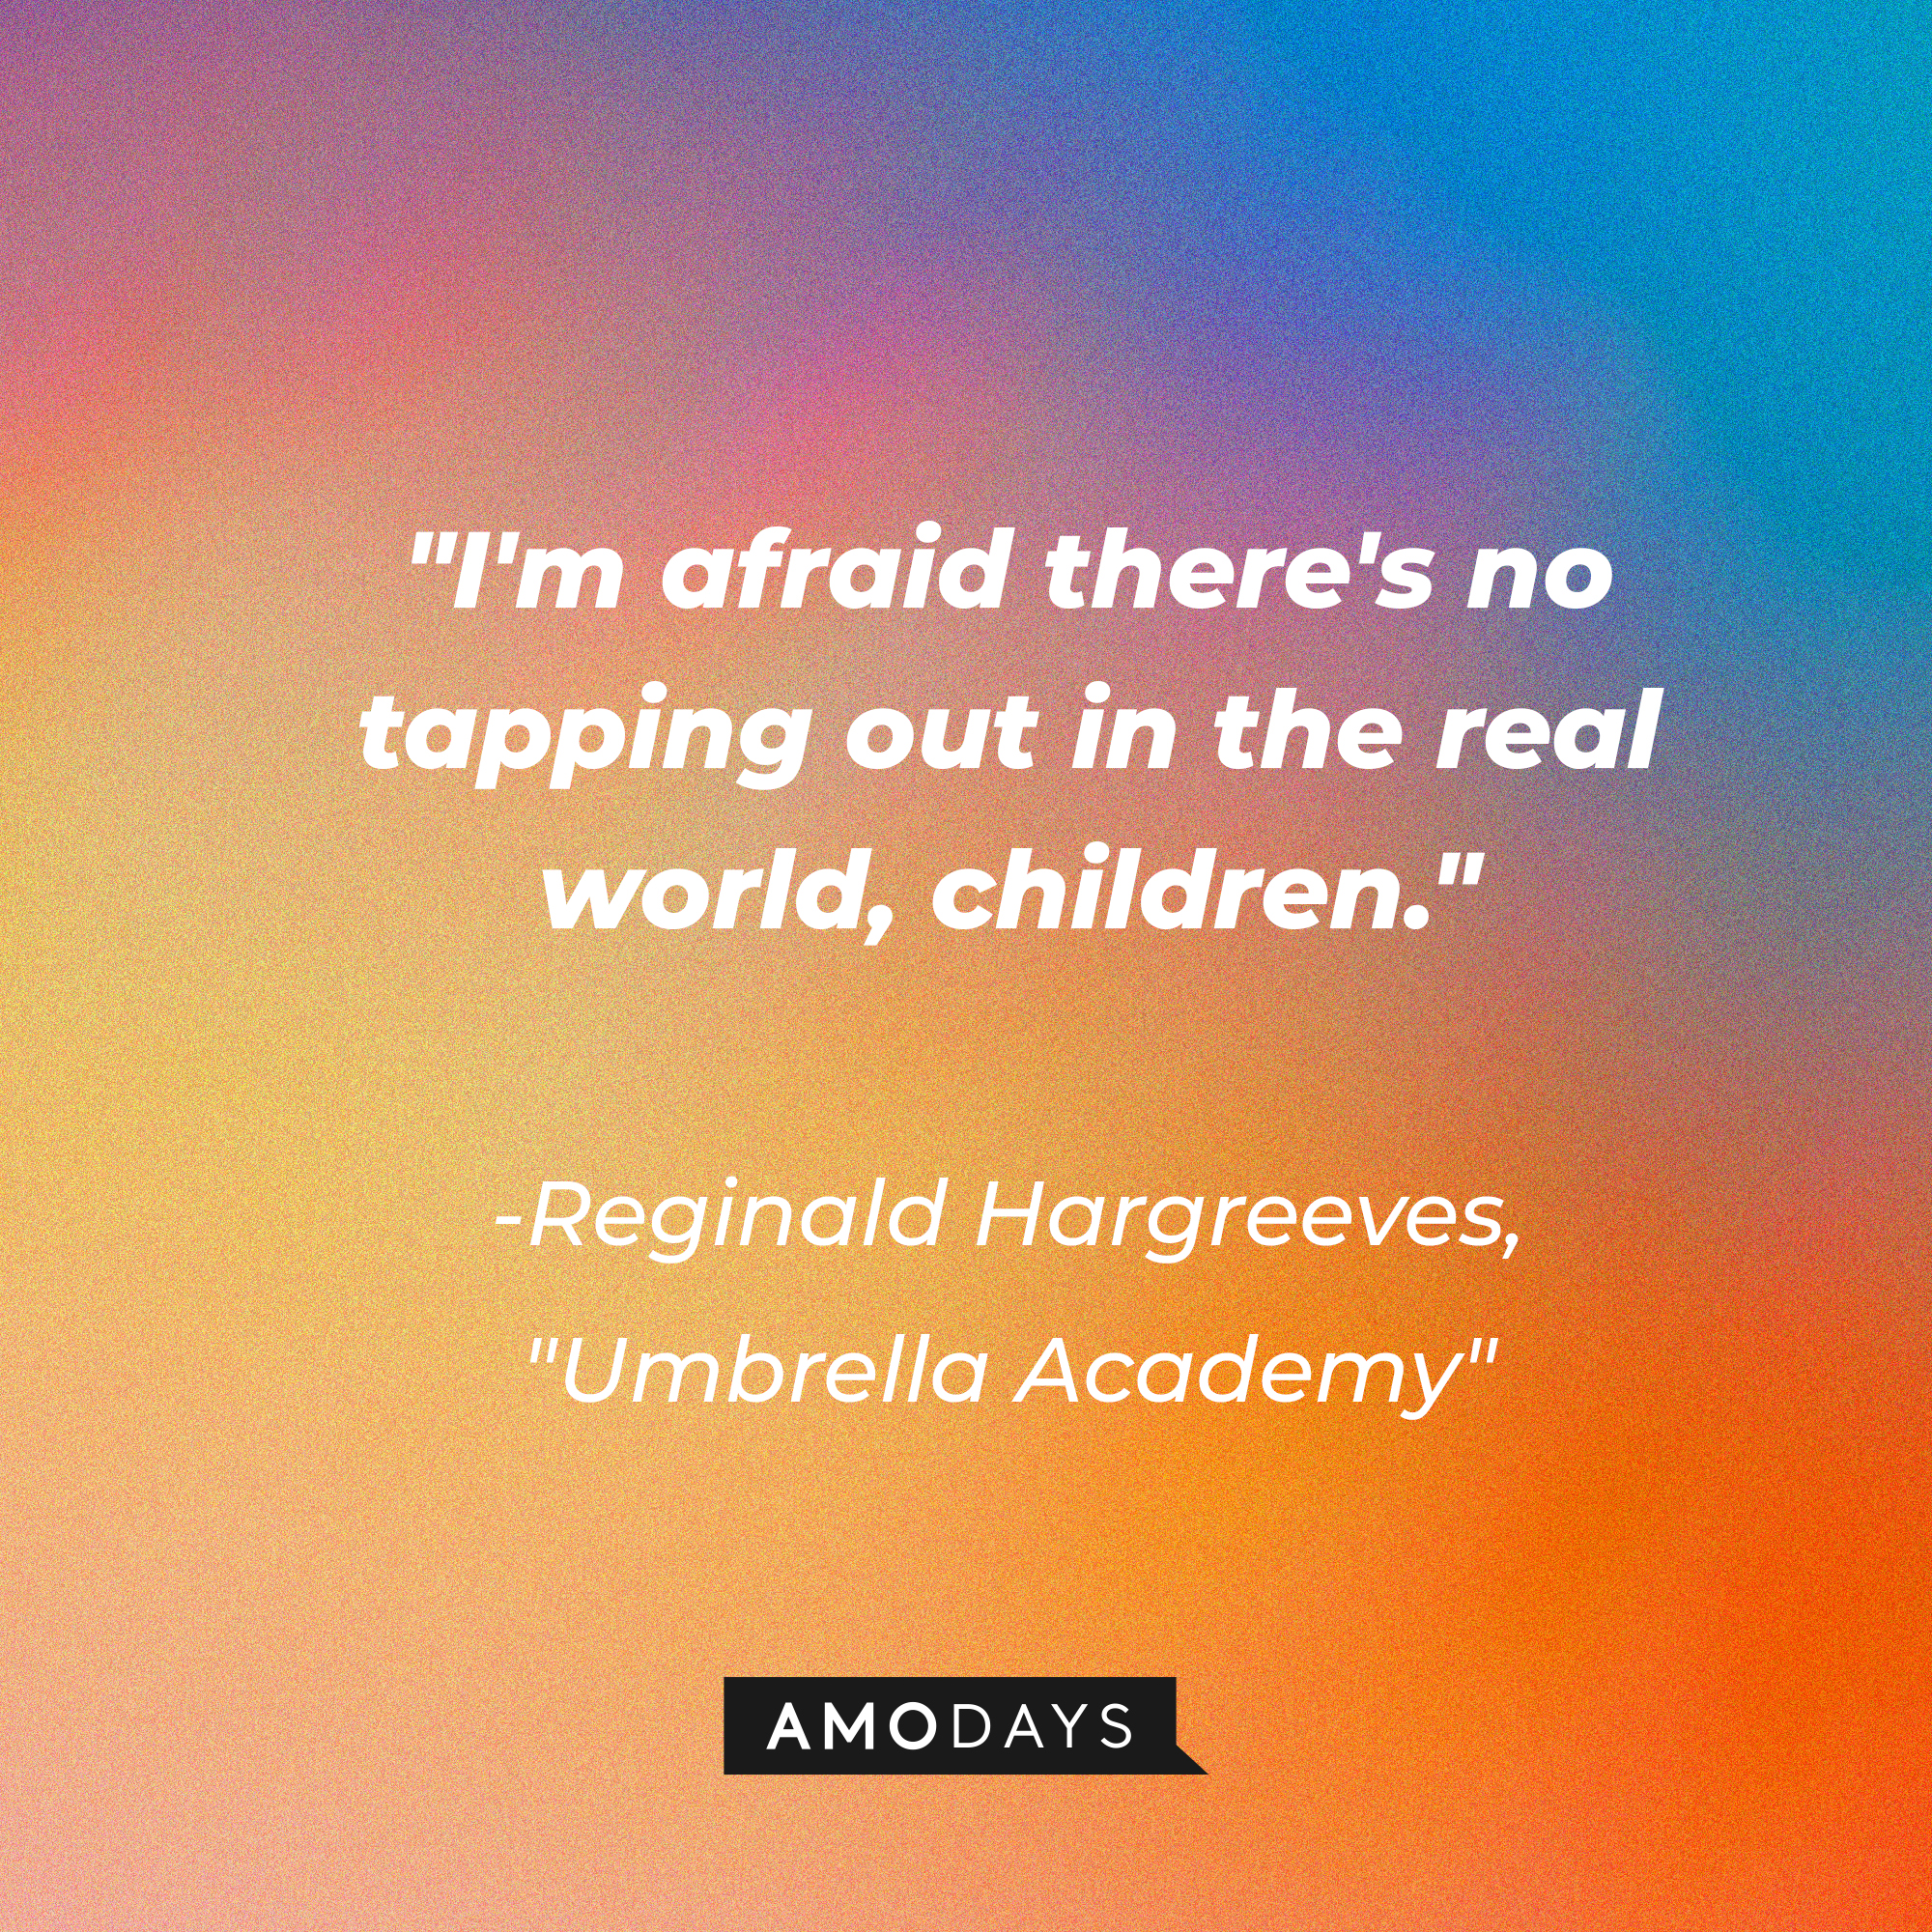 Reginald Hargreeves' quote in "The Umbrella Academy:" "I'm afraid there's no tapping out in the real world, children." | Source: AmoDays